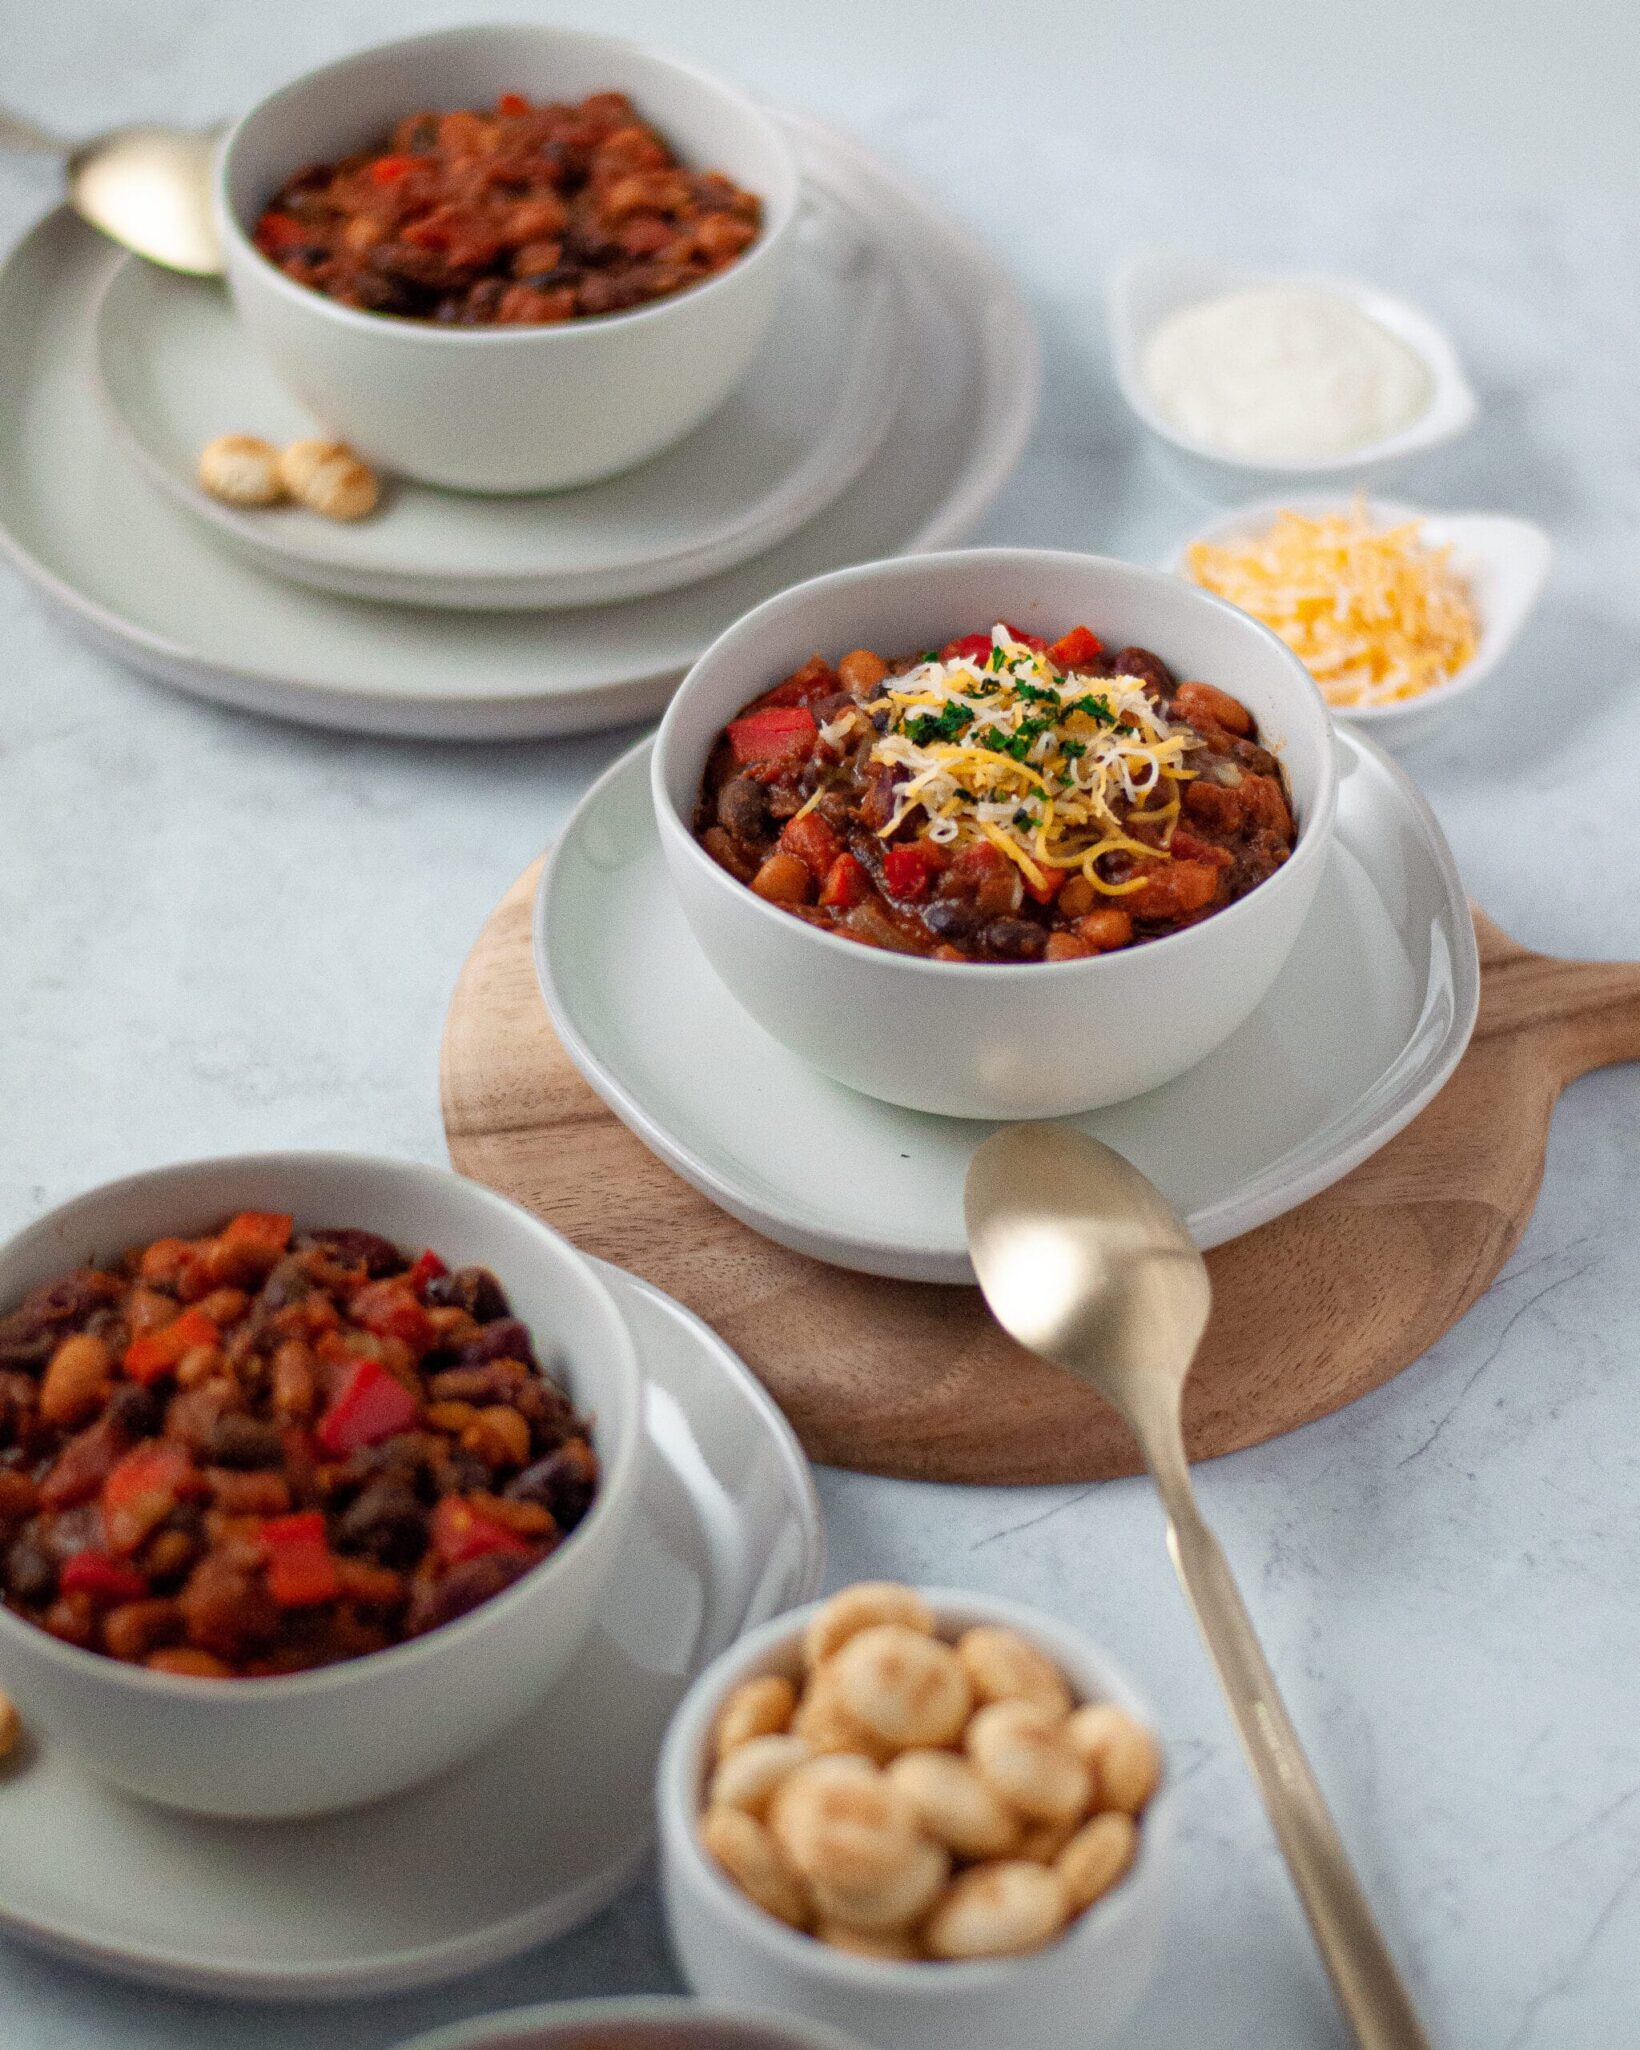 Three bowls of chili on a table.